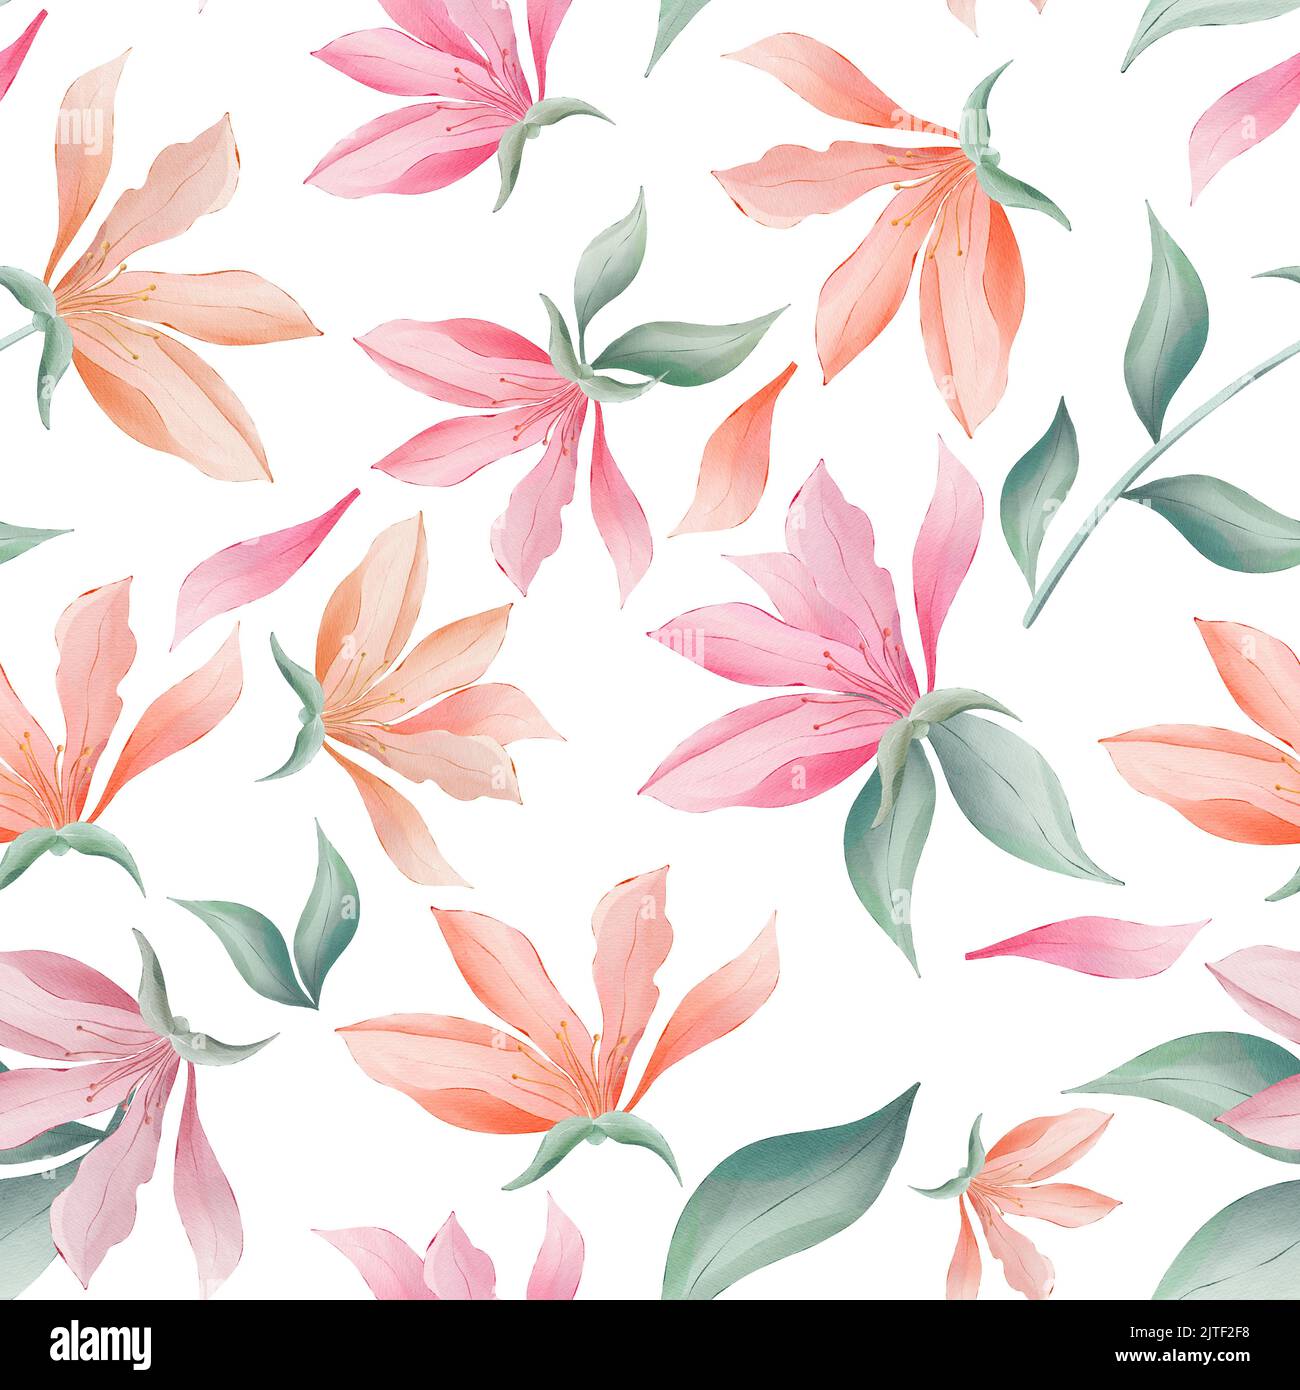 Magnolia flowers and leaves seamless pattern Stock Photo